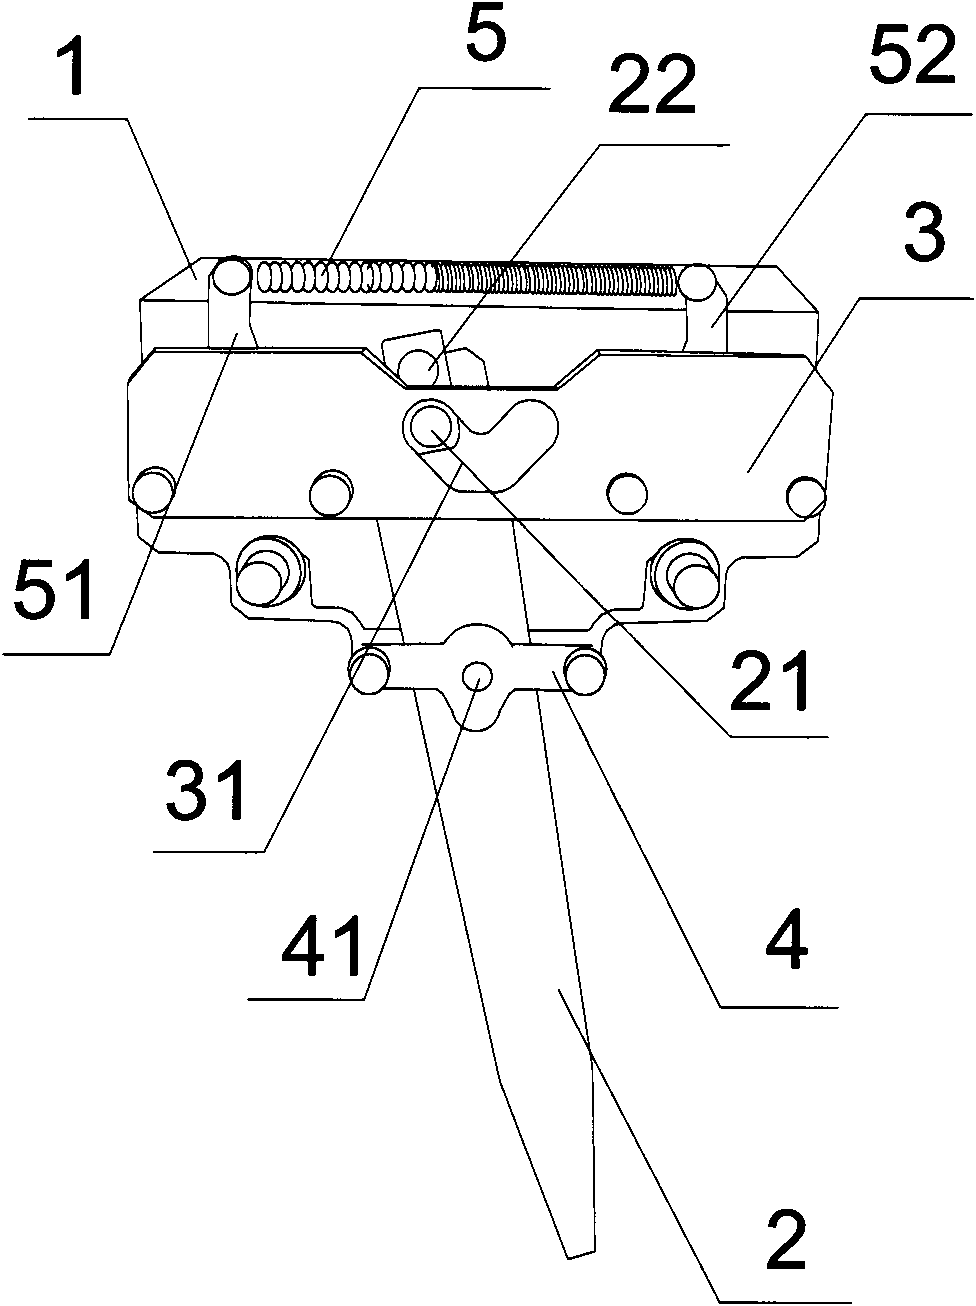 Lead wire deflection device